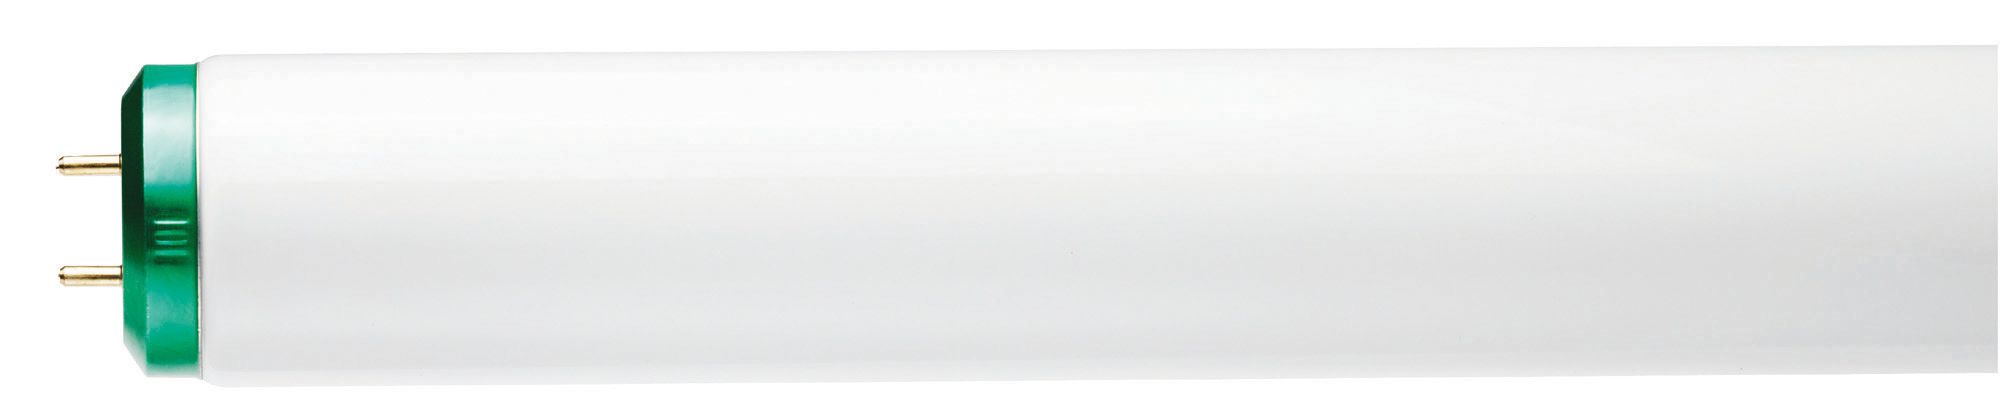 273599 Linear Fluorescent Lamp Philips Lighting;Signify Lamps